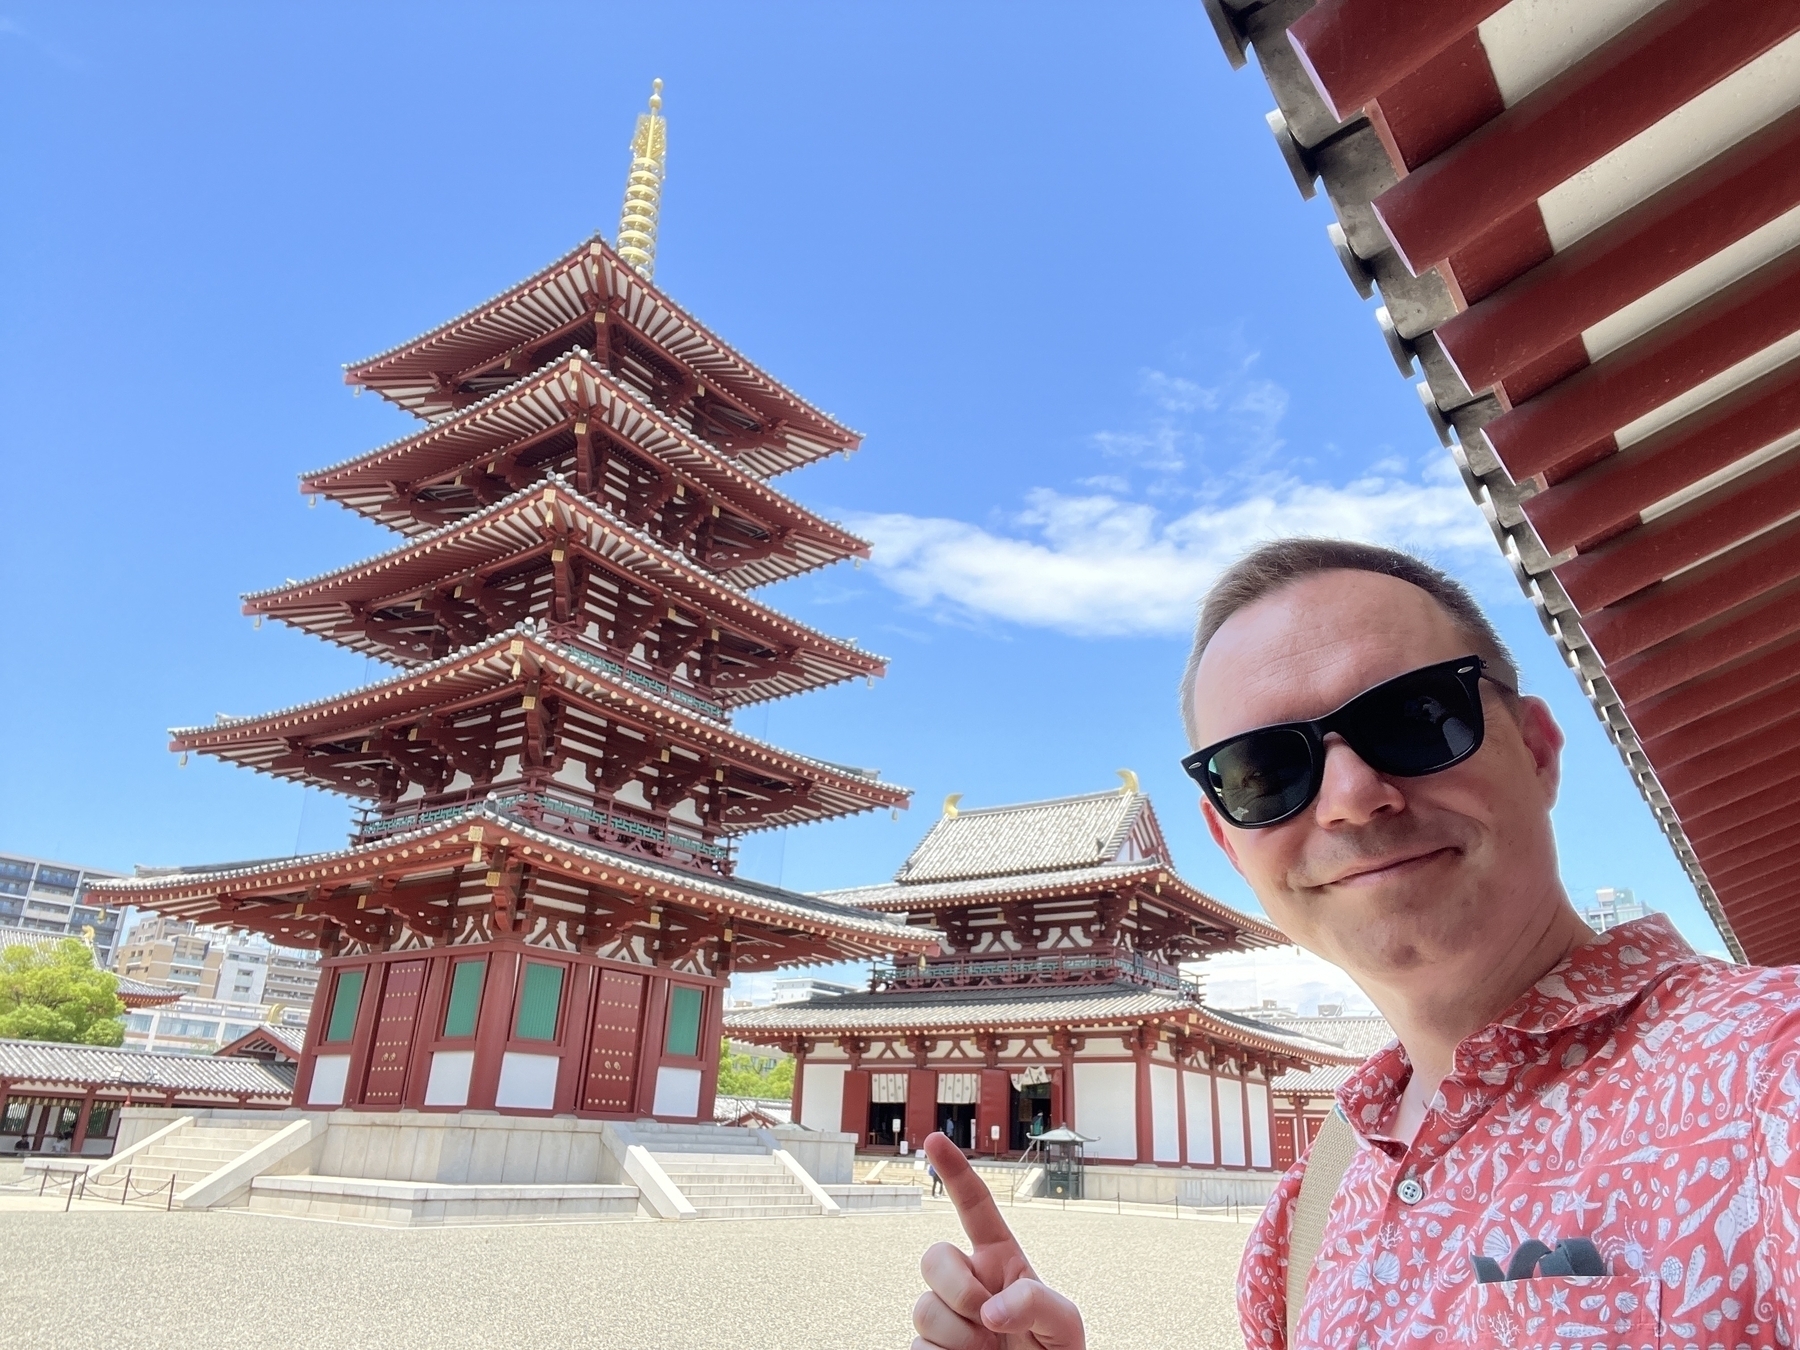 Chad selfie with the famous 5 layer pagoda and the main building of Shitenno-ji